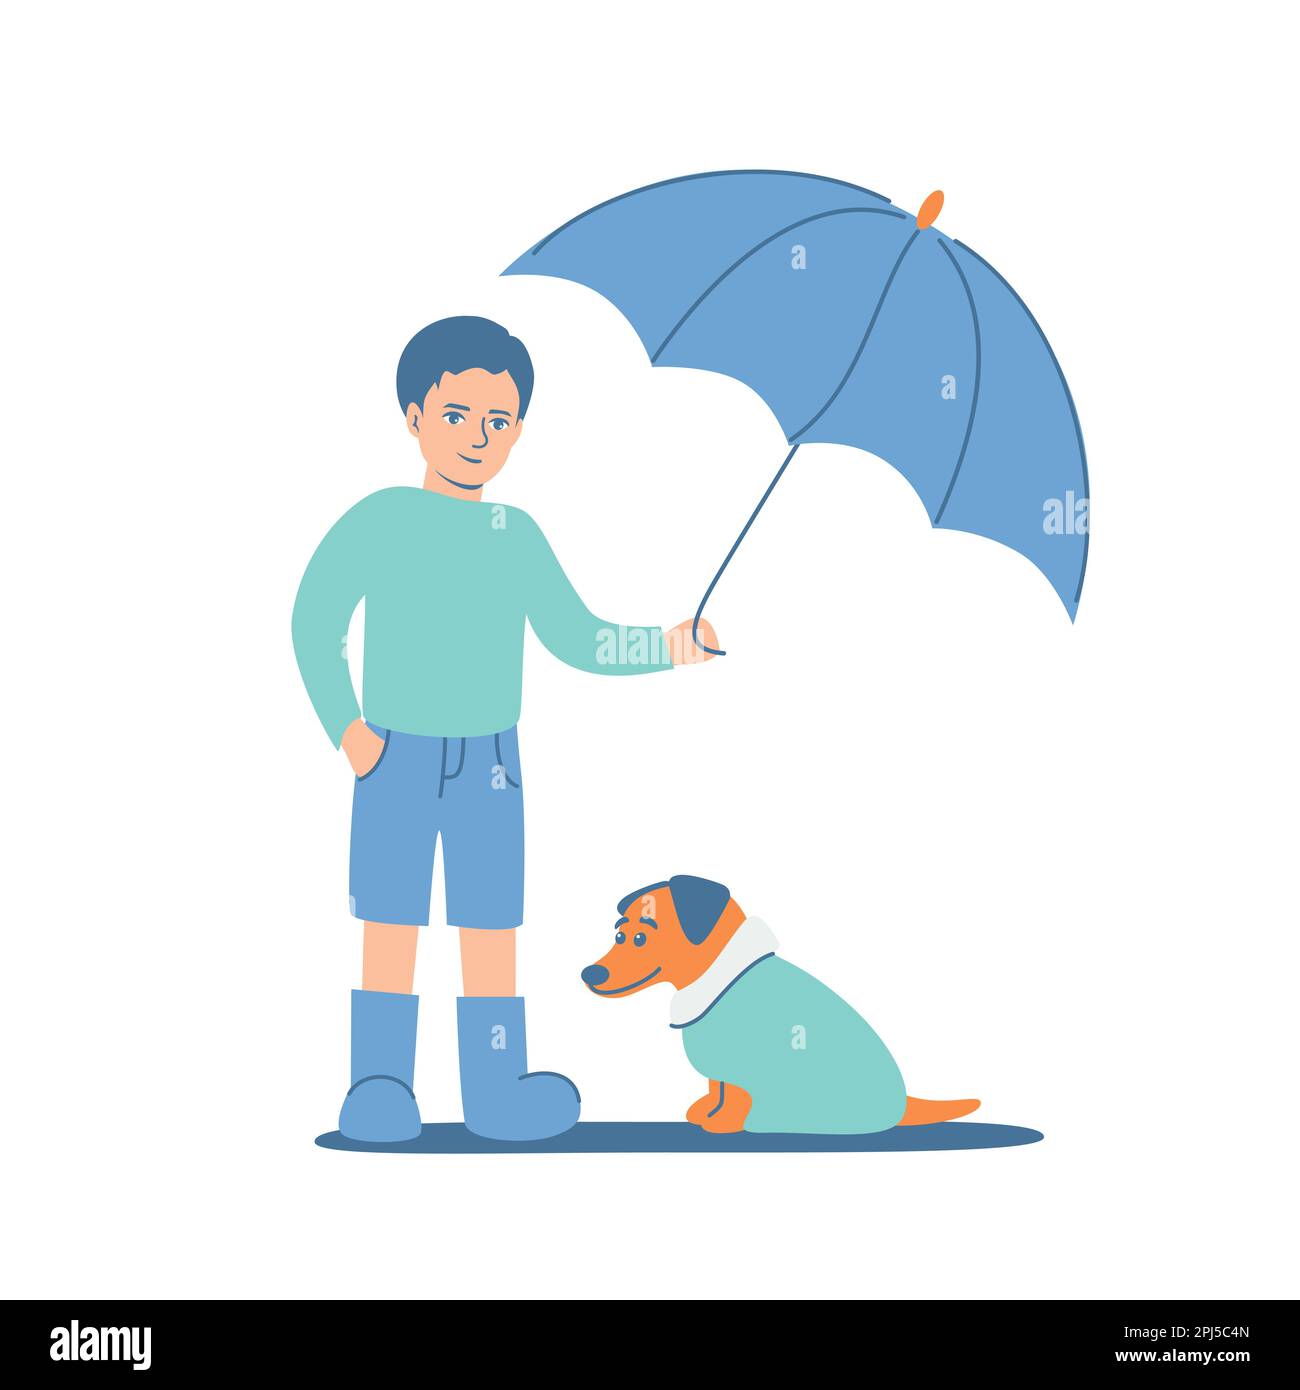 Young boy in rubbers holding umbrella under dog in coat. Child protecting puppy from rain. Friendship and take care concept. Kids education. Flat vector illustration. Stock Vector